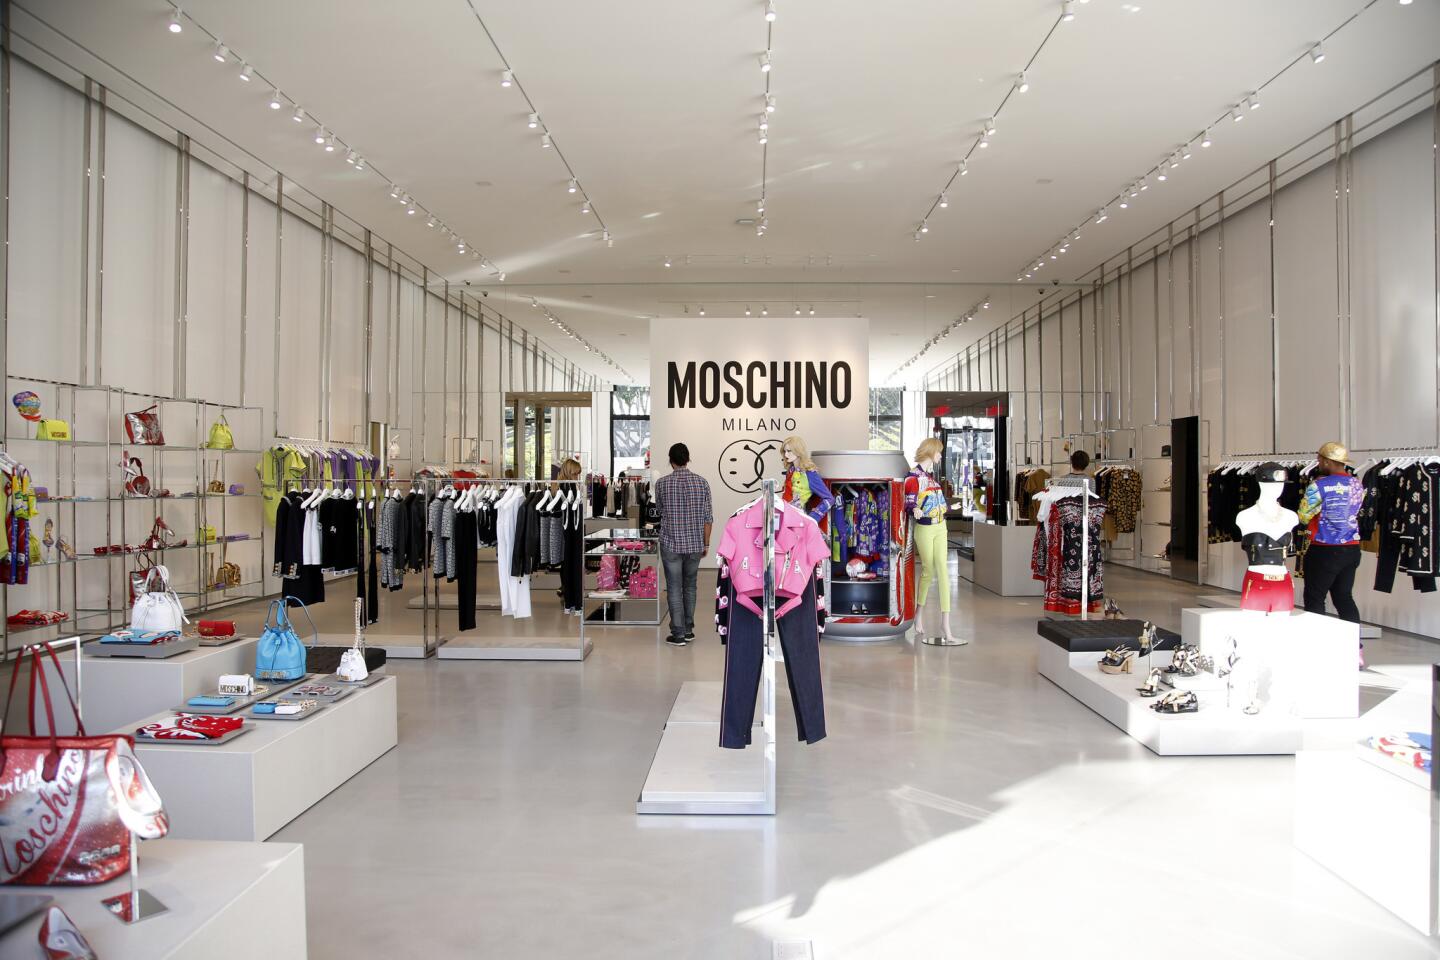 Moschino's new fragrance was inspired by Jeremy Scott's childhood